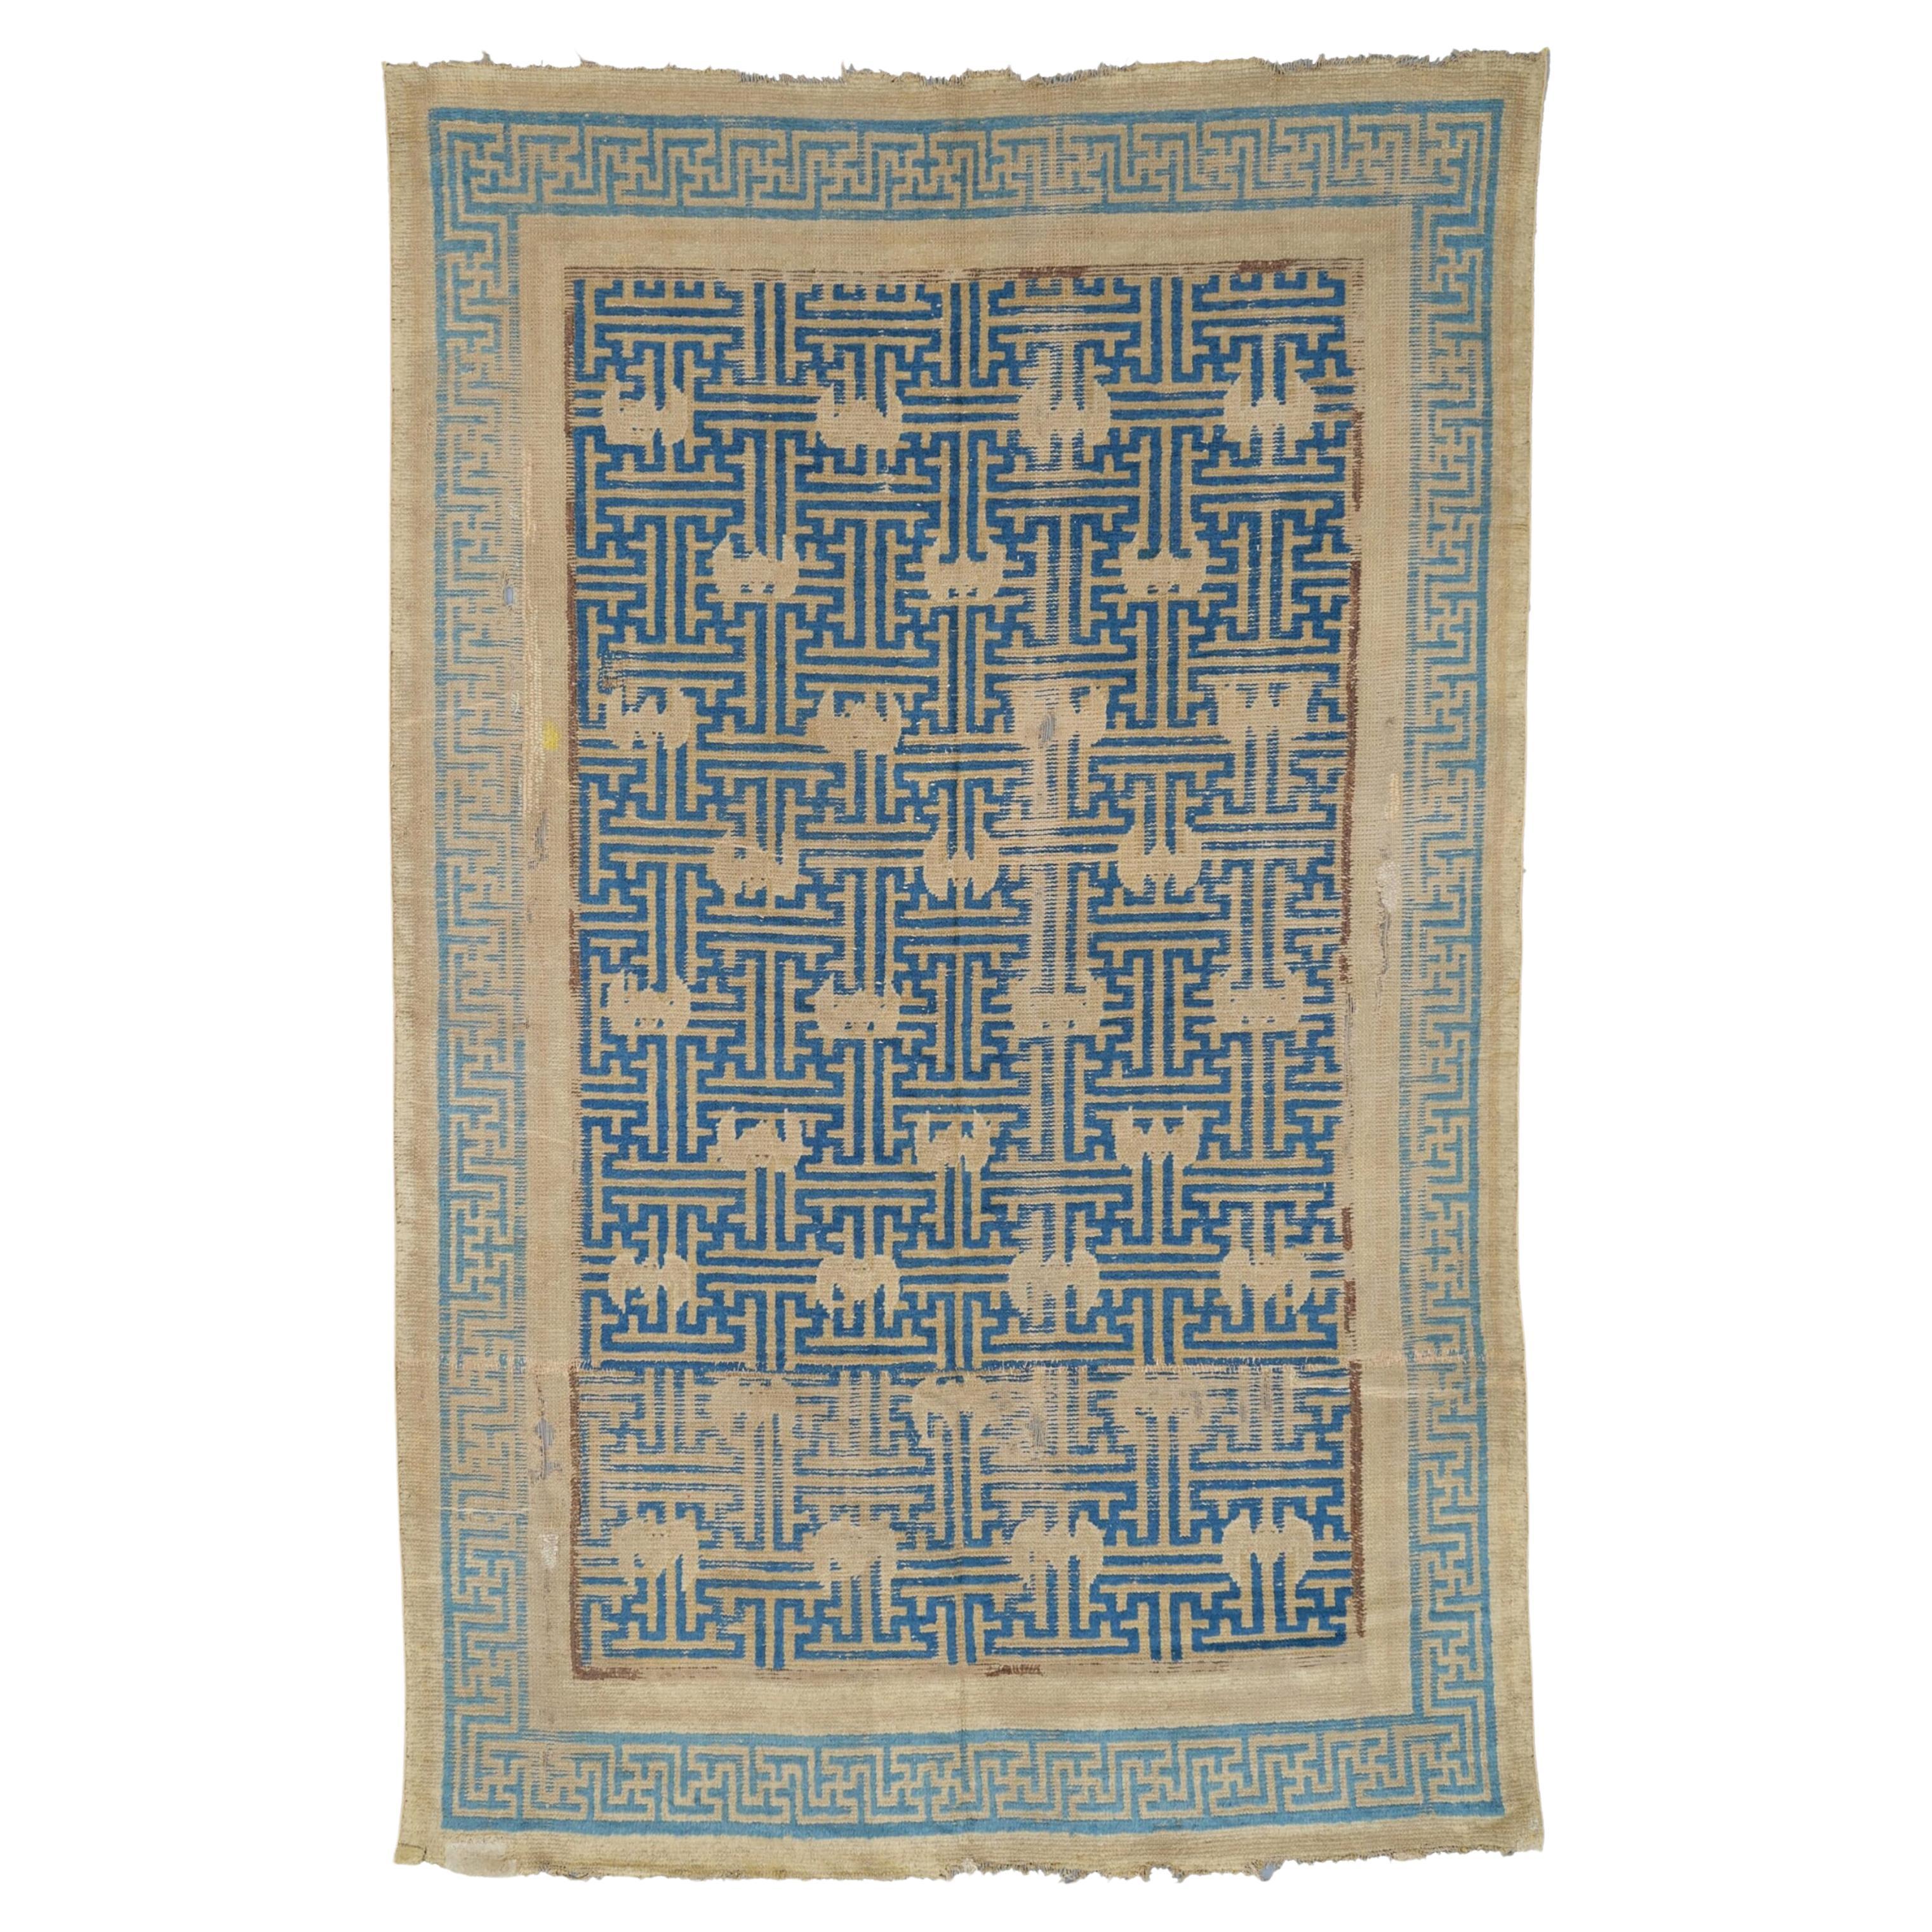 17th Century Ningxia Rug Fragment - Antique Chinese Rug Fragment For Sale